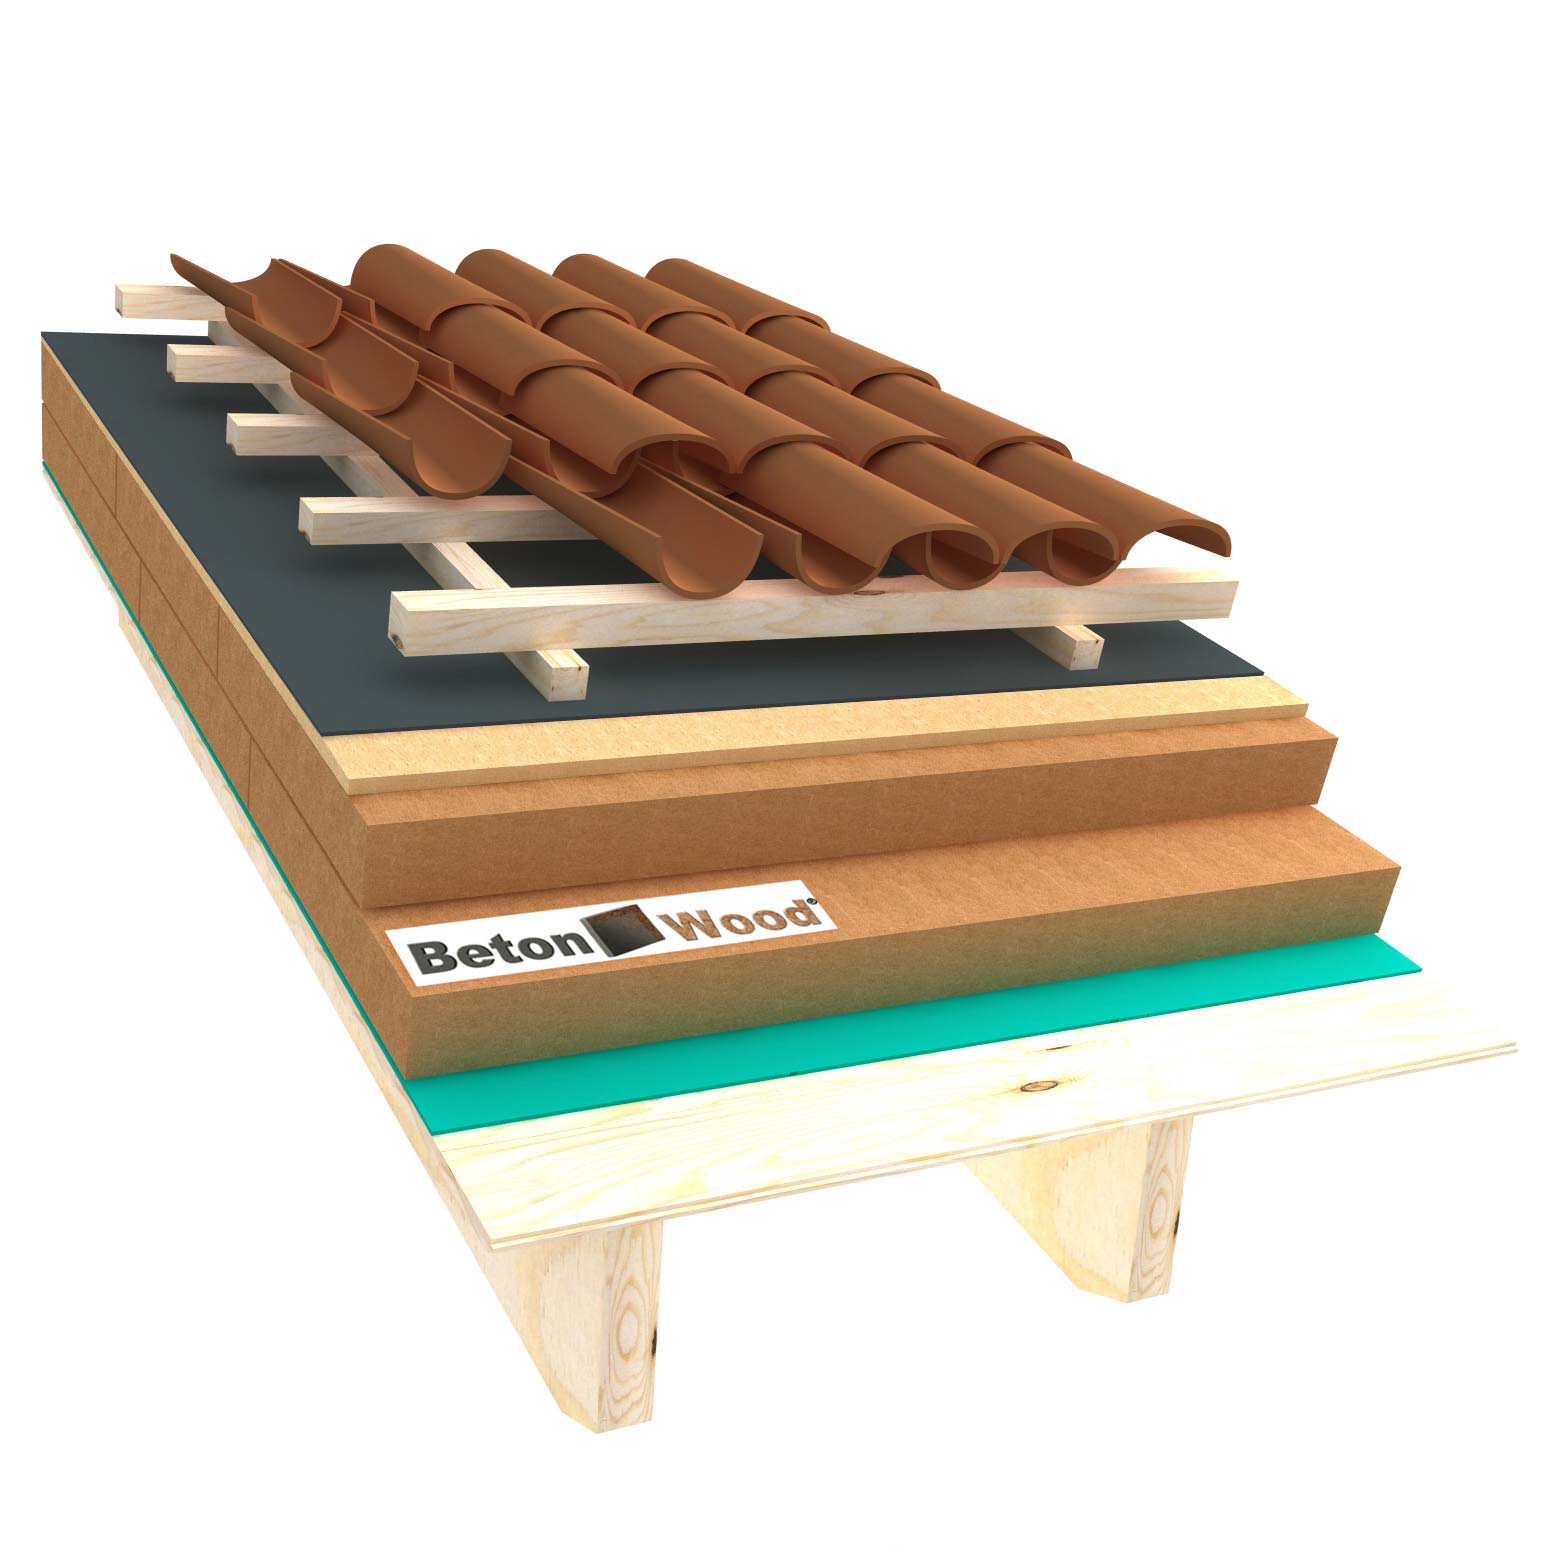 Ventilated roof with wood fiber Isorel and Special on matchboarding